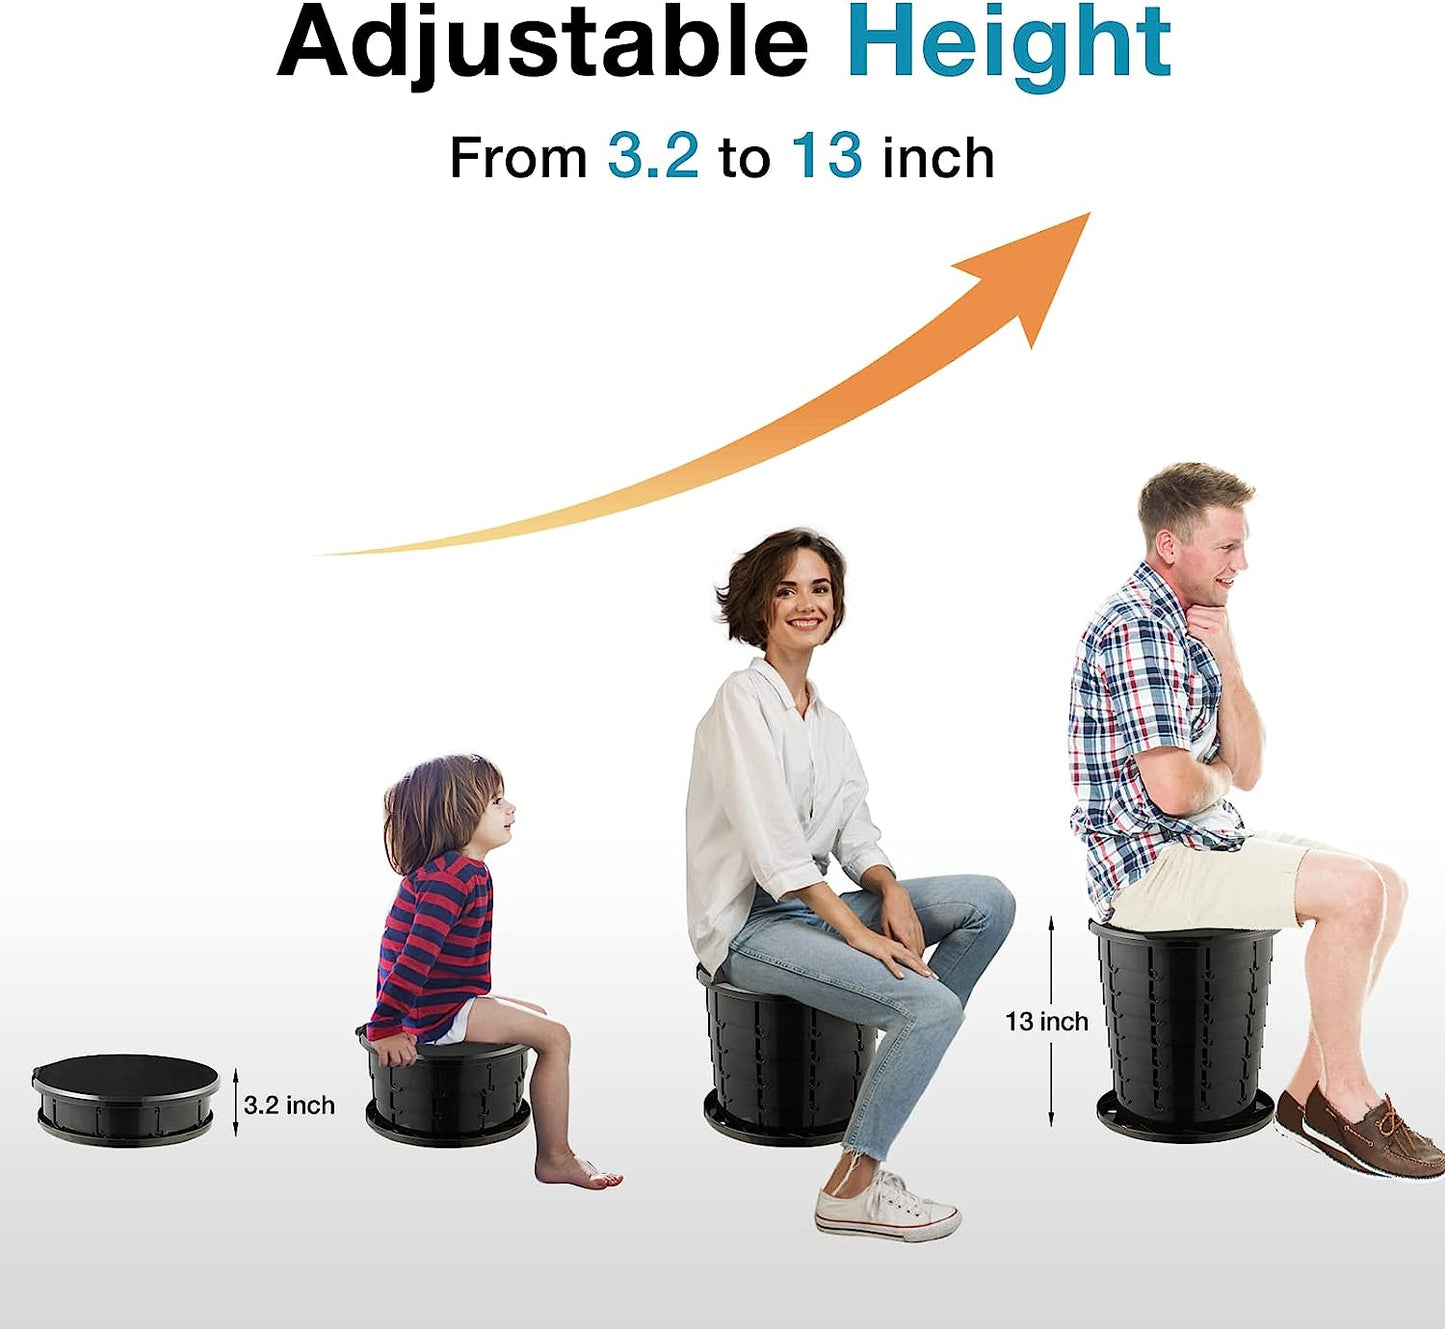 Retractable Portable Toilet Travel Toilet Adjustable Height Camping Toilet Portable Potty for Adults Kids, Foldable Portable Toilet for Camping/Car, XL Size